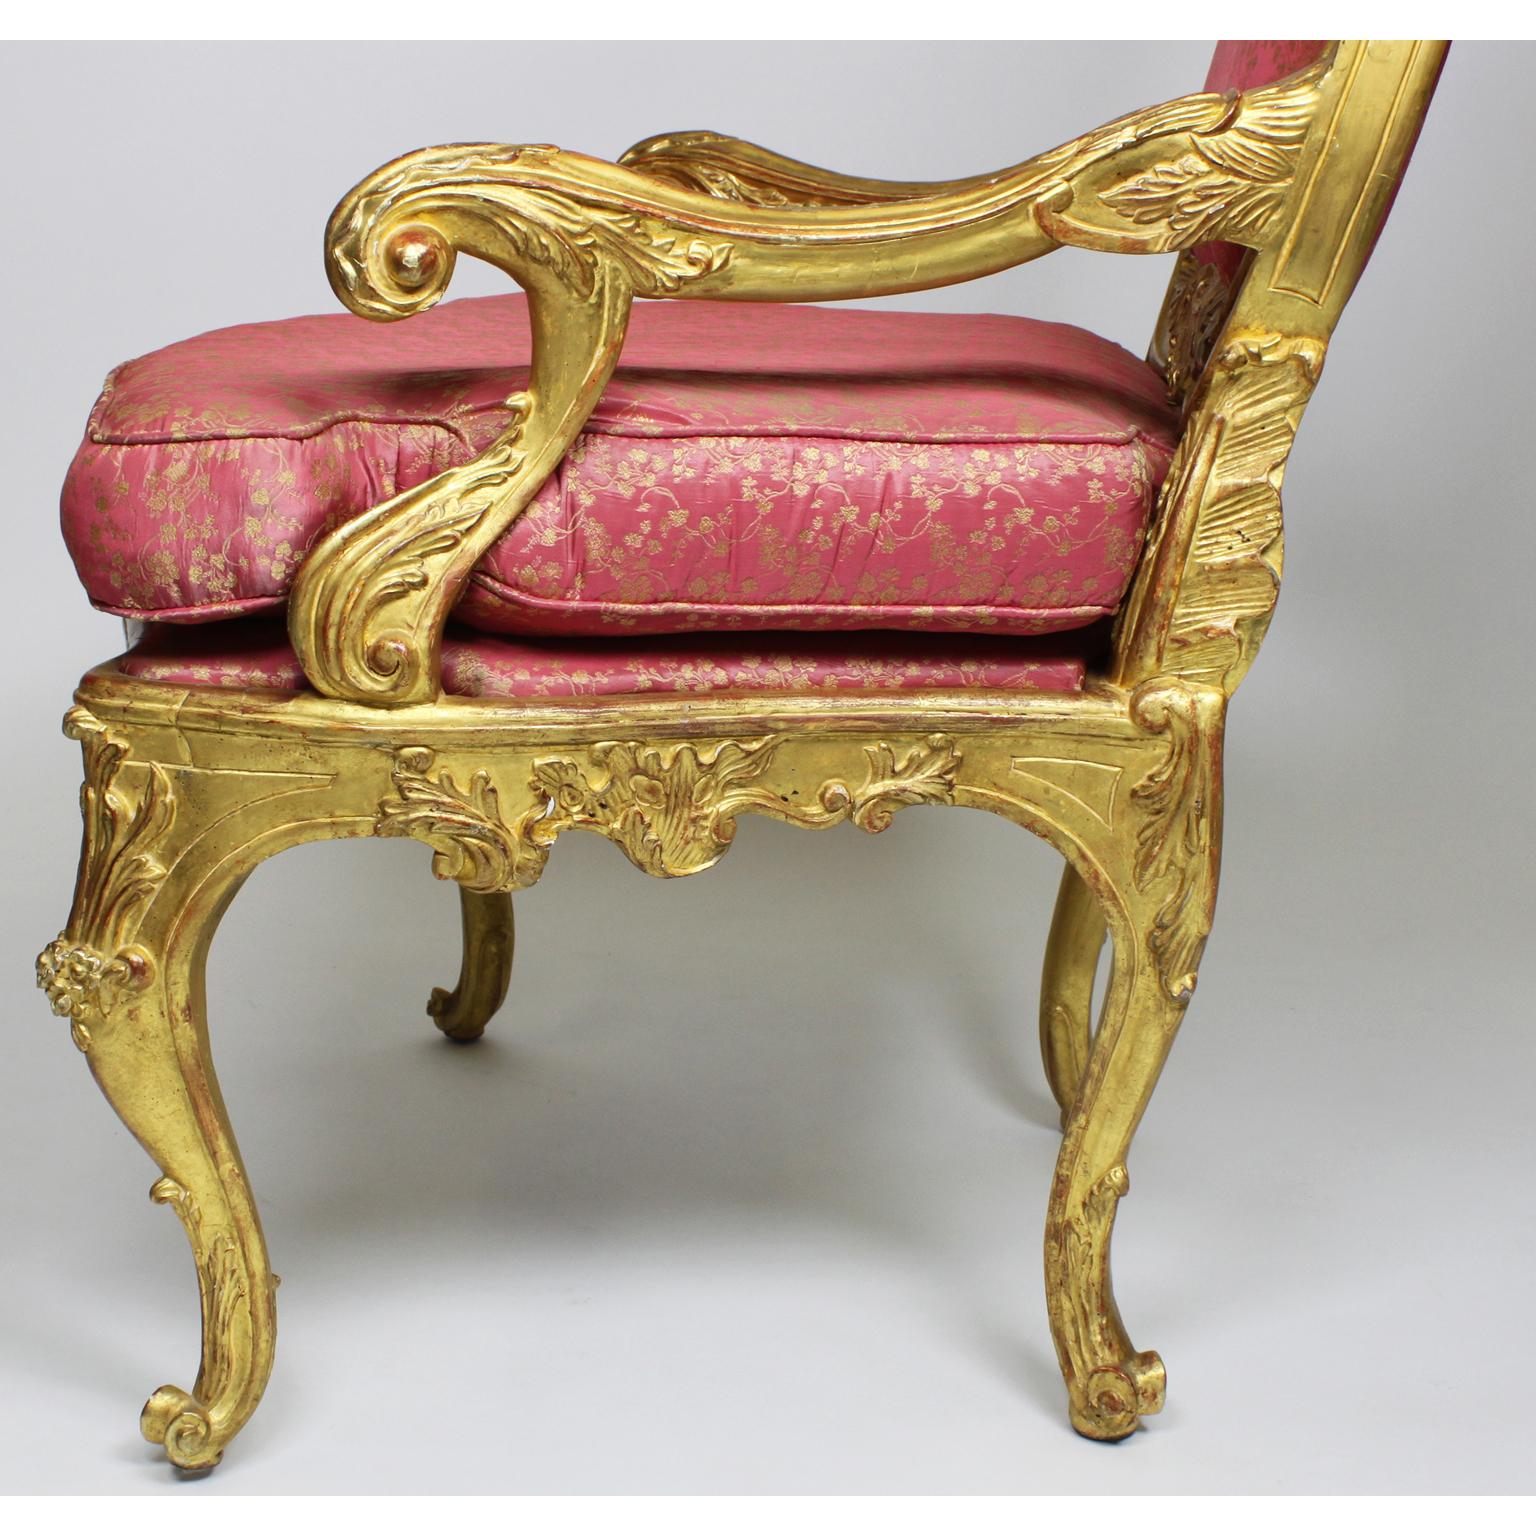 Pair of Italian Venetian Rococo Revival Style Giltwood Carved Throne Armchairs For Sale 7